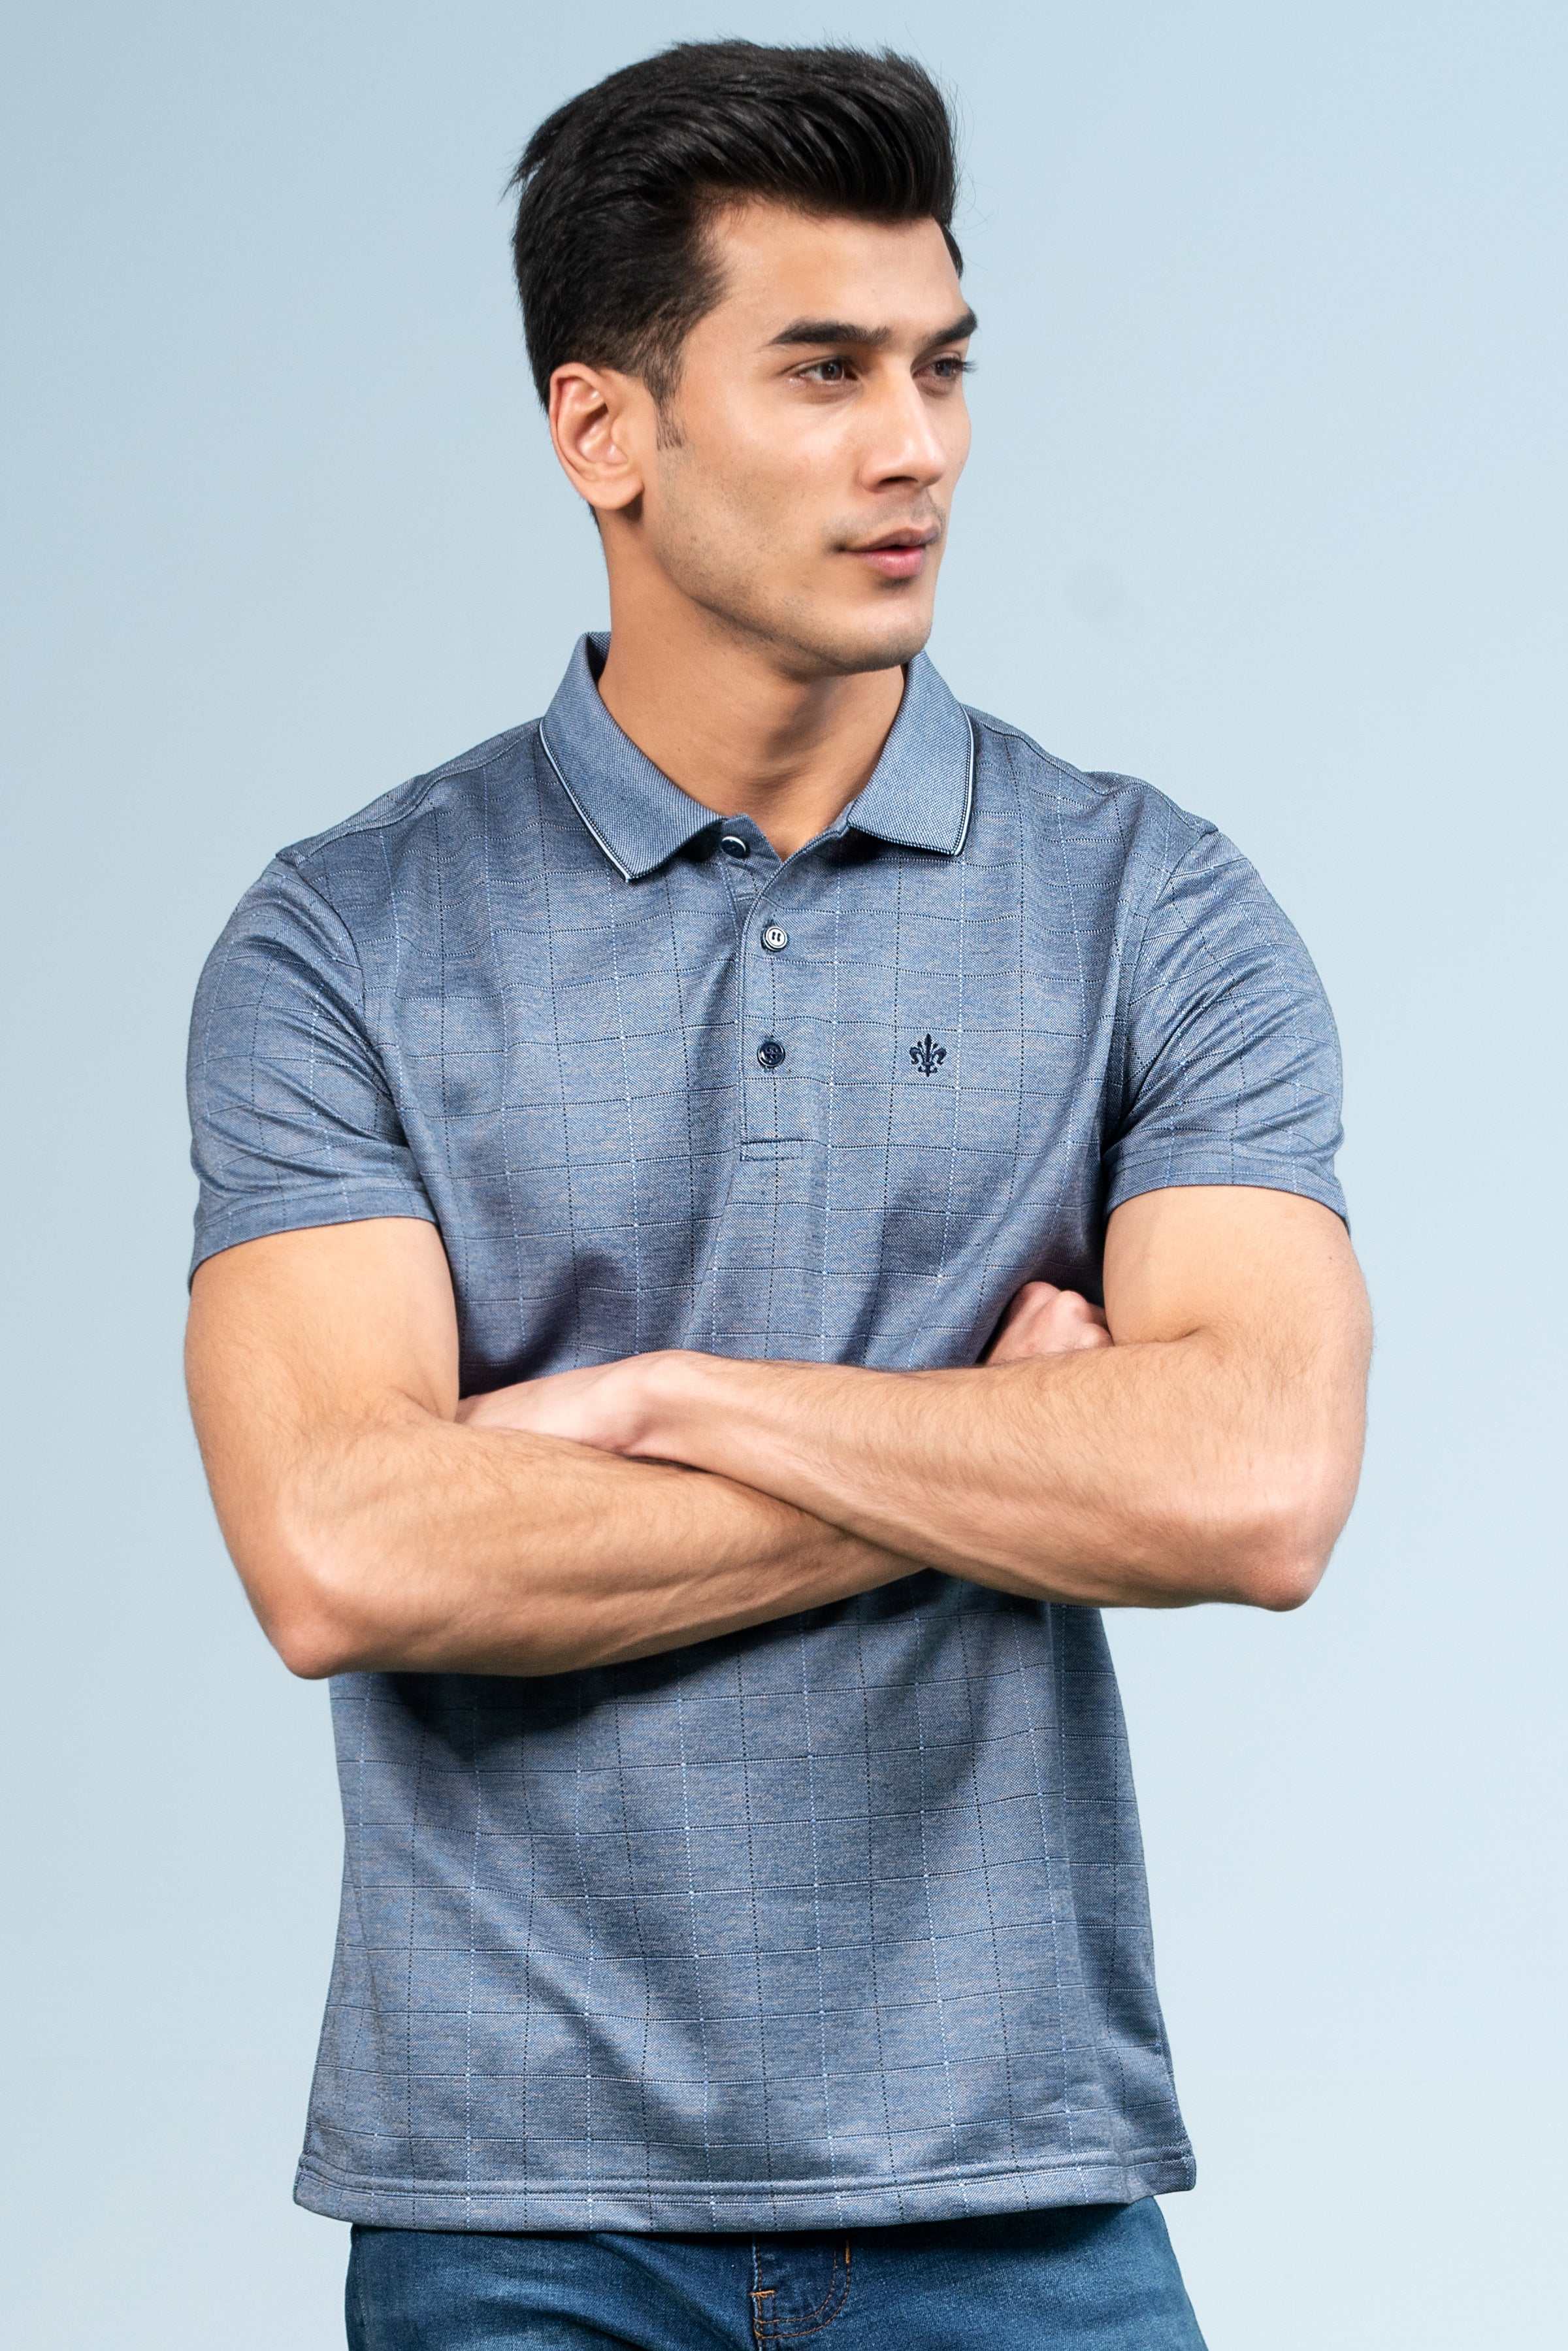 EXECUTIVE ICONIC POLO TEAL BLUE - Charcoal Clothing